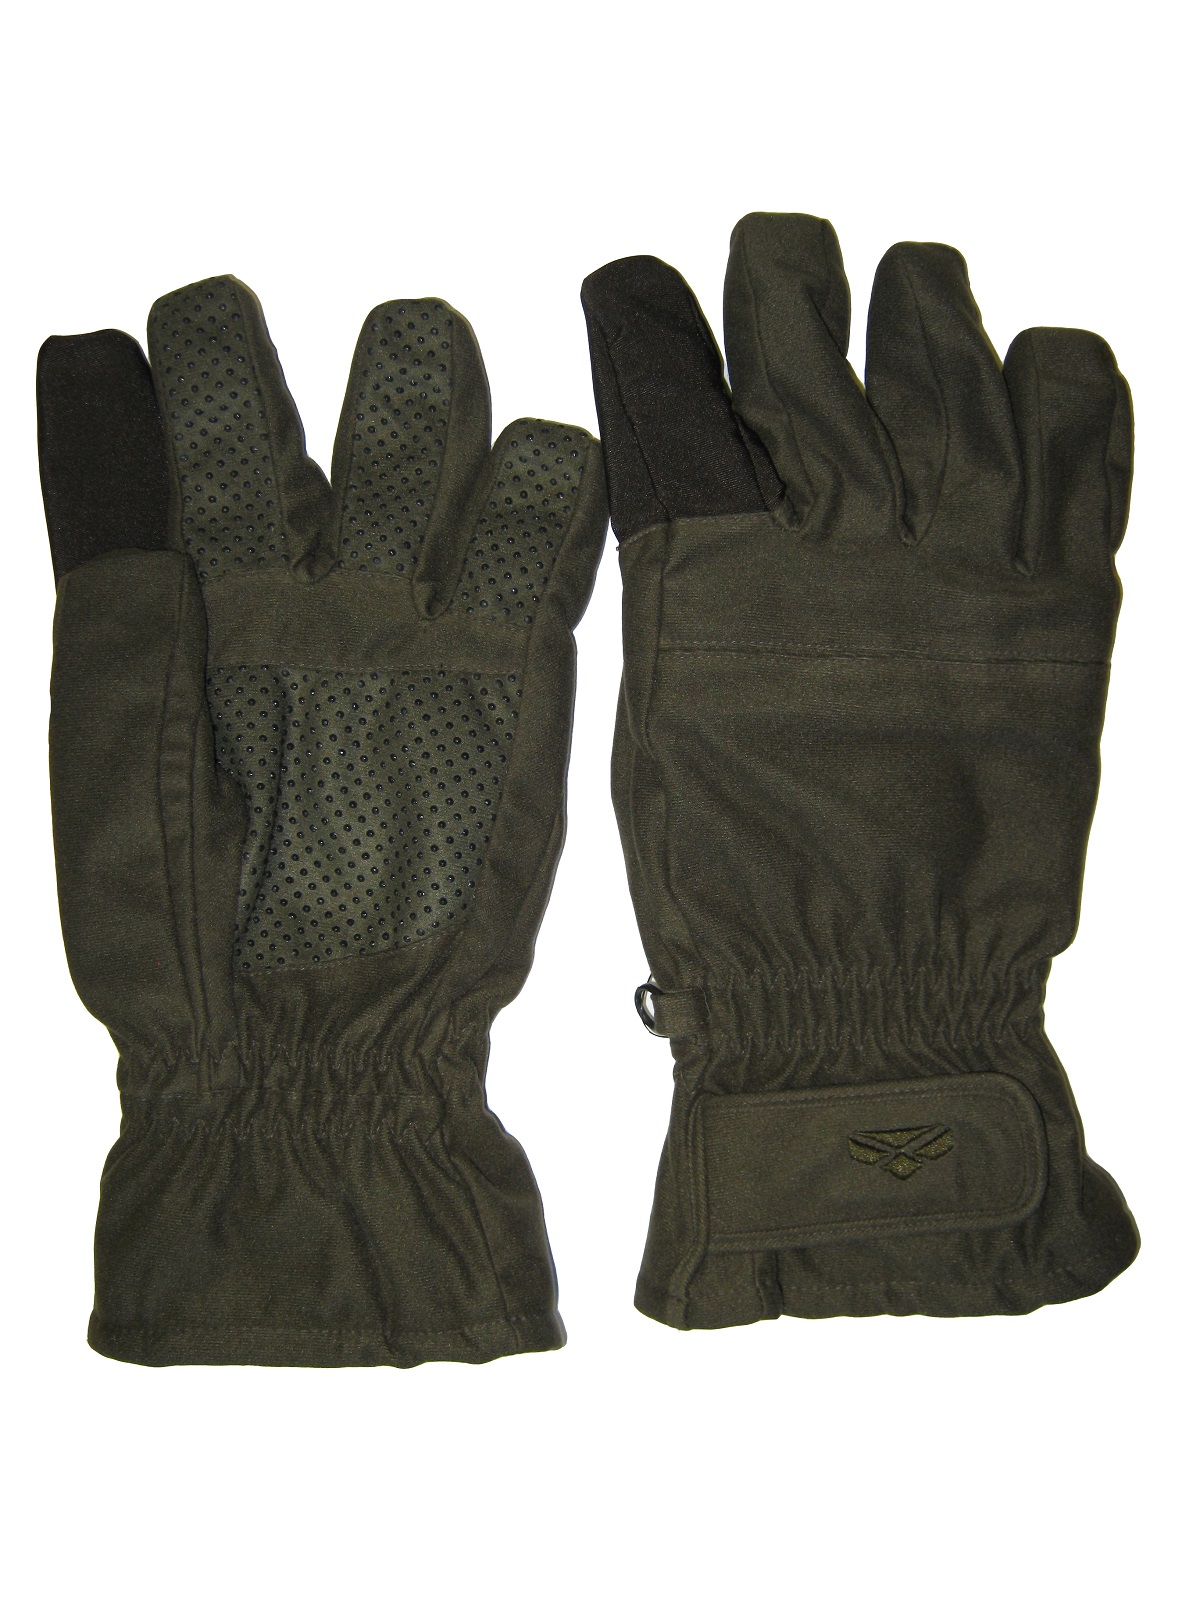 Hoggs of Fife - Field Pro Hunting Gloves